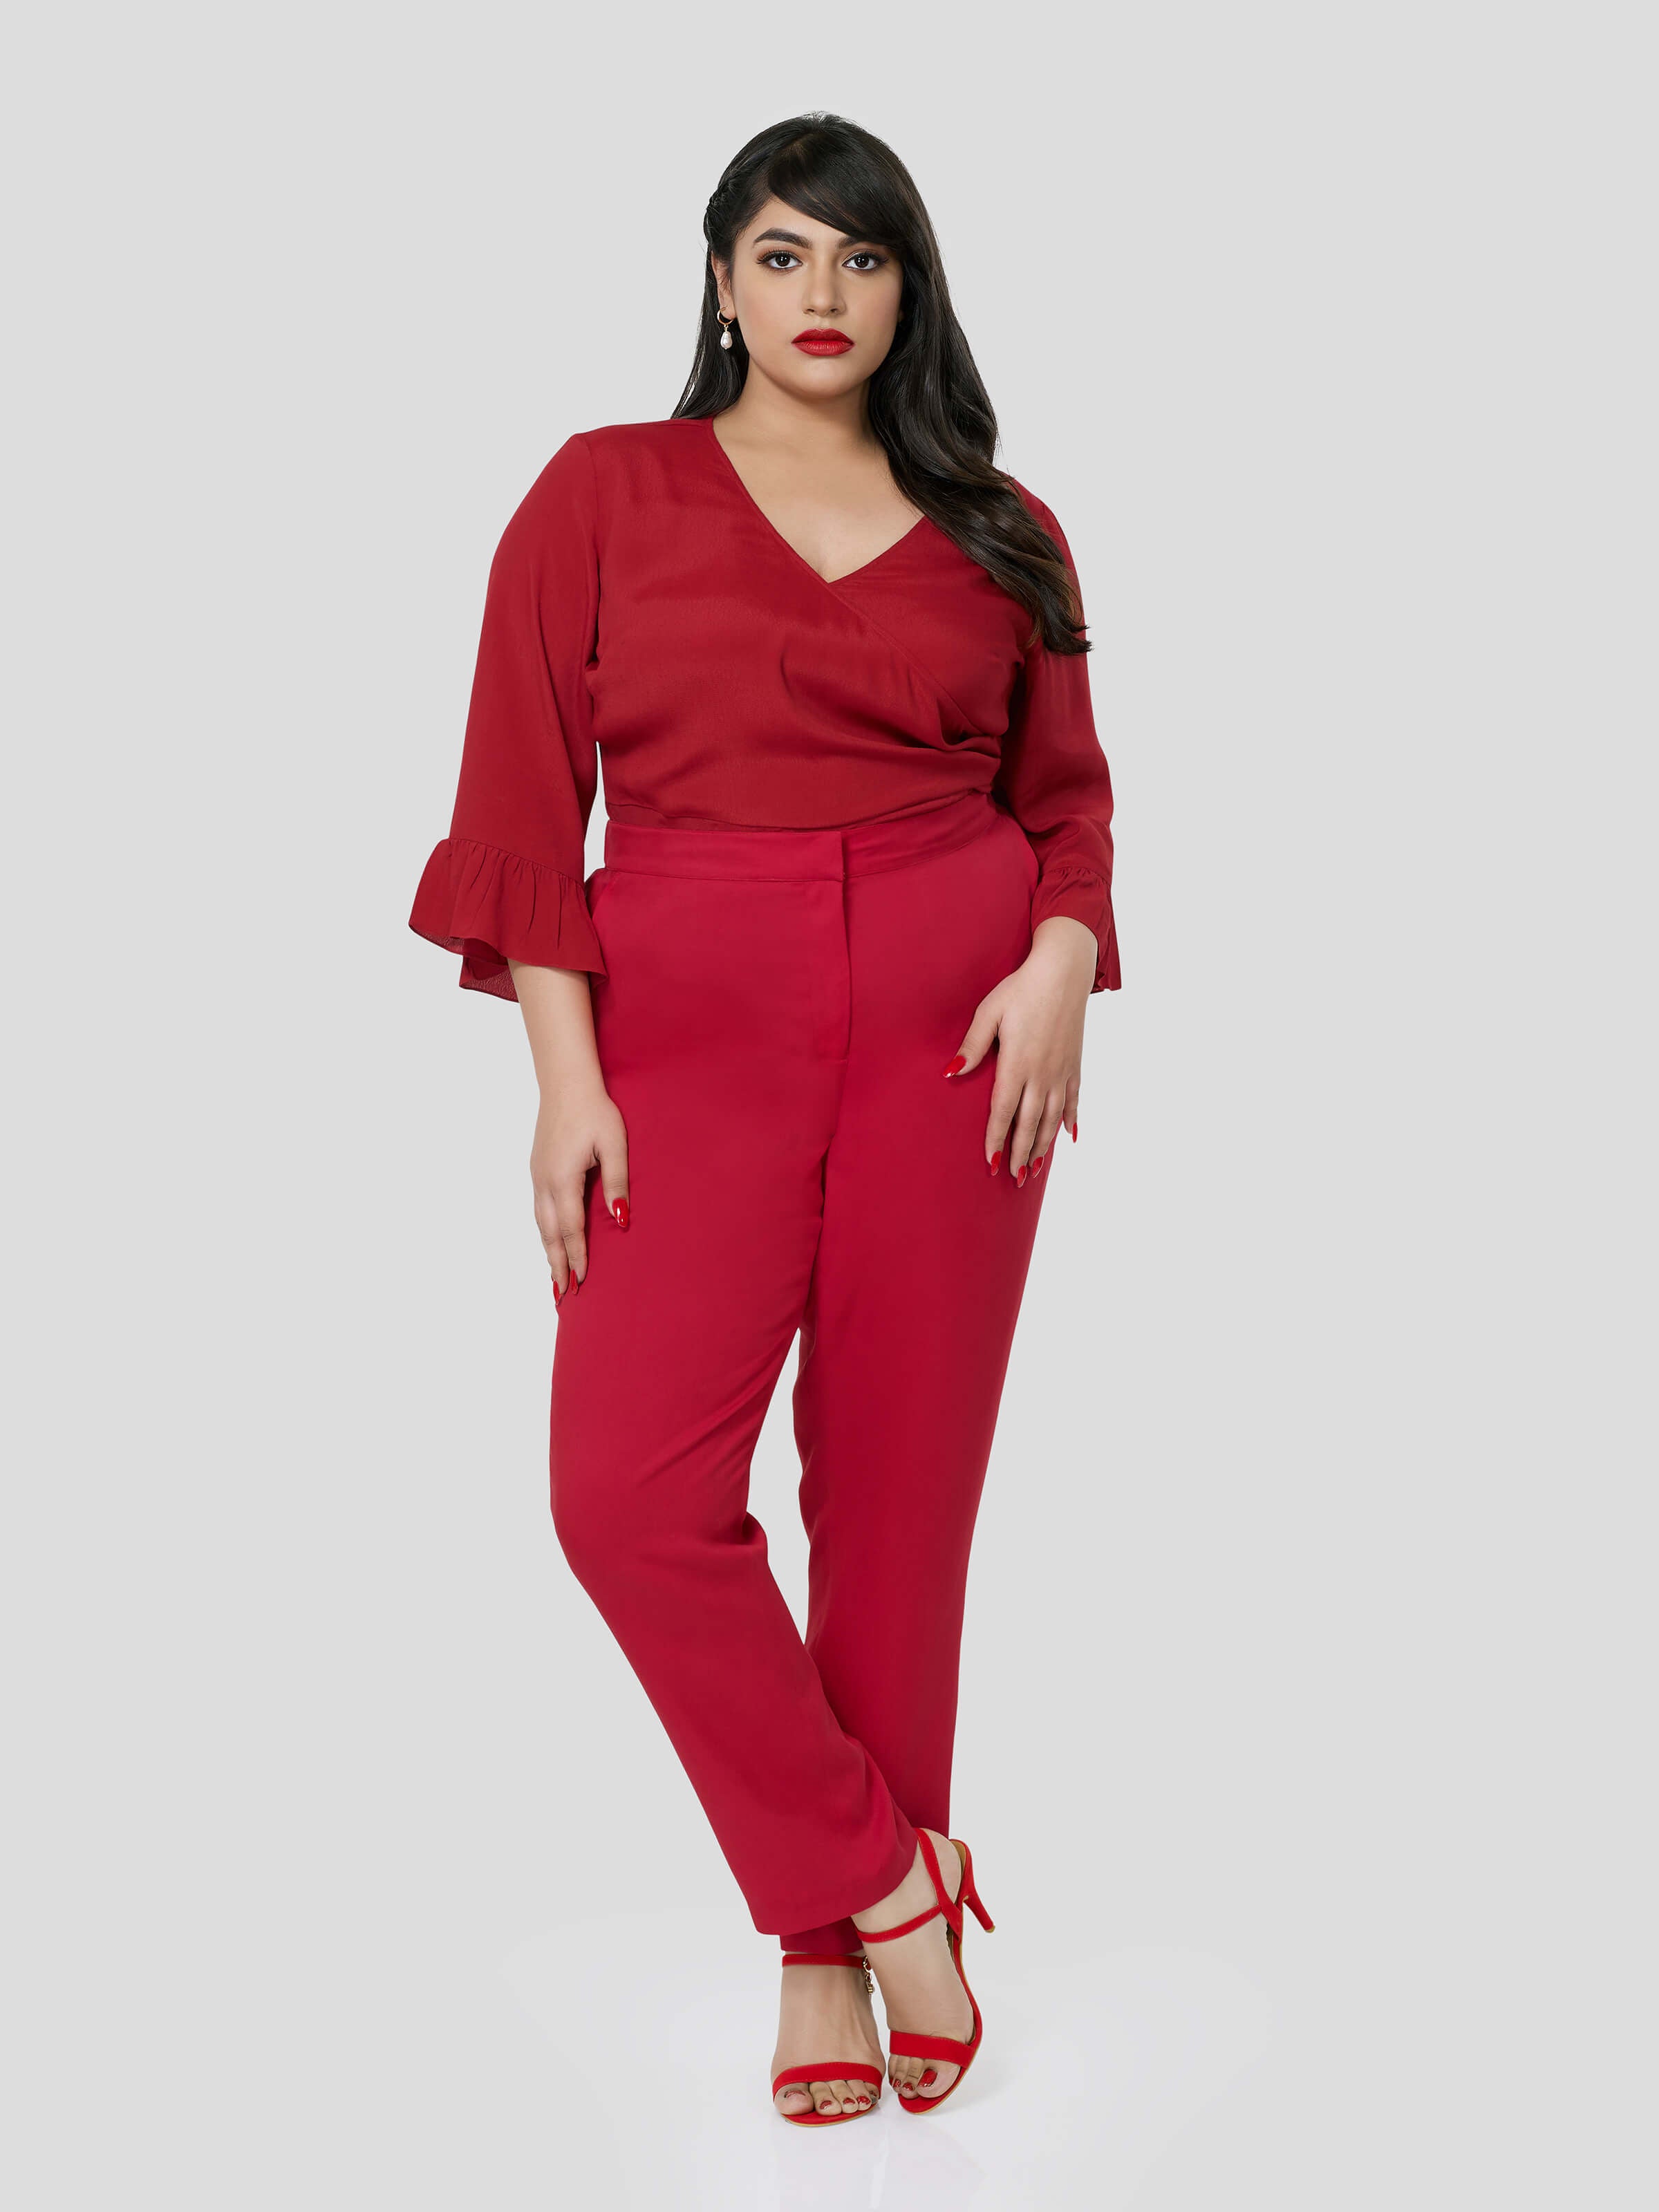 Red Wrap Around Top With Narrow Pants - Zest Mélange 